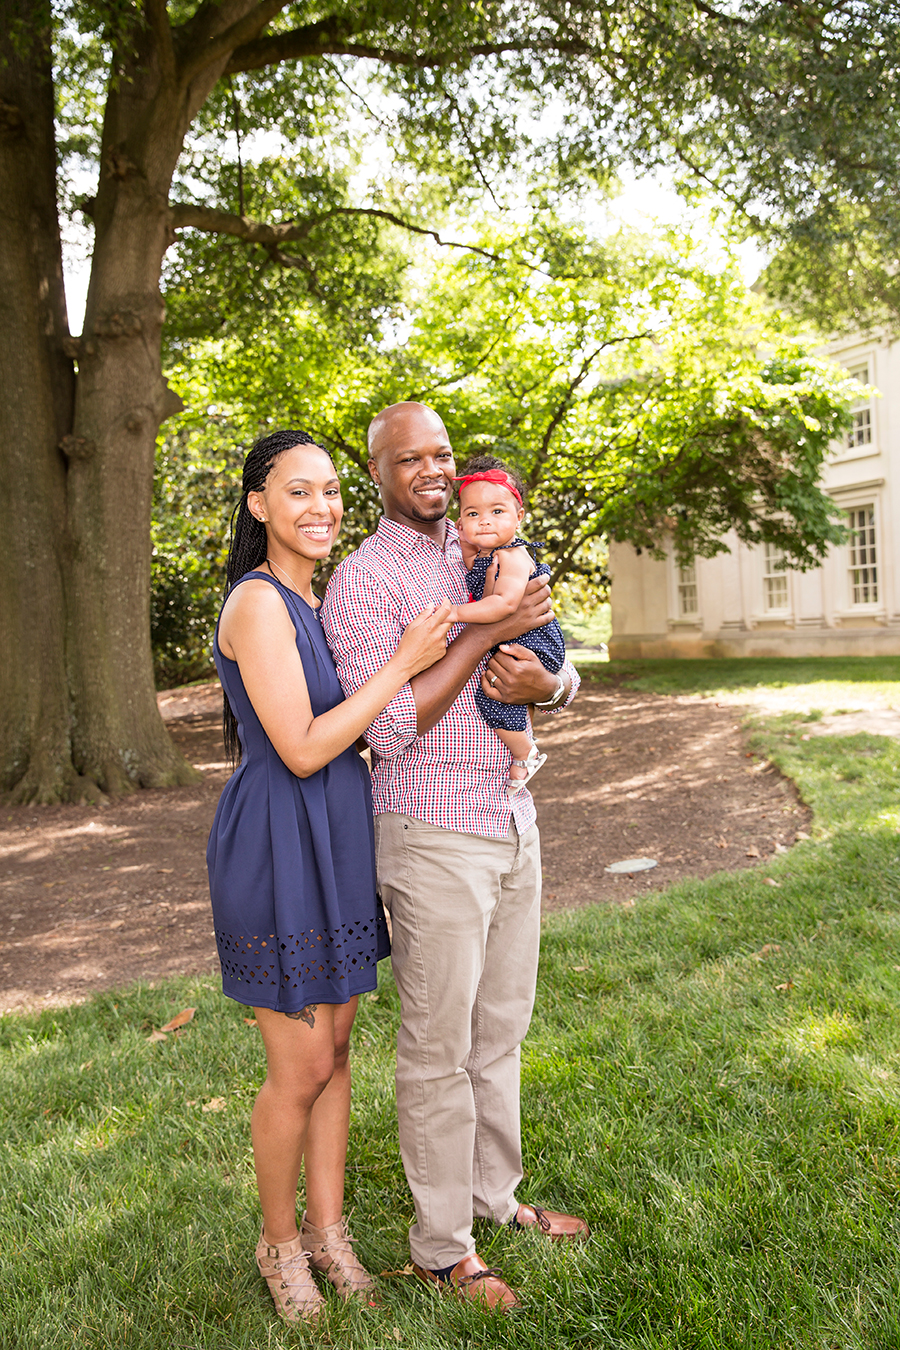 Price Family Photos at the VMFA - Image Property of www.j-dphoto.com